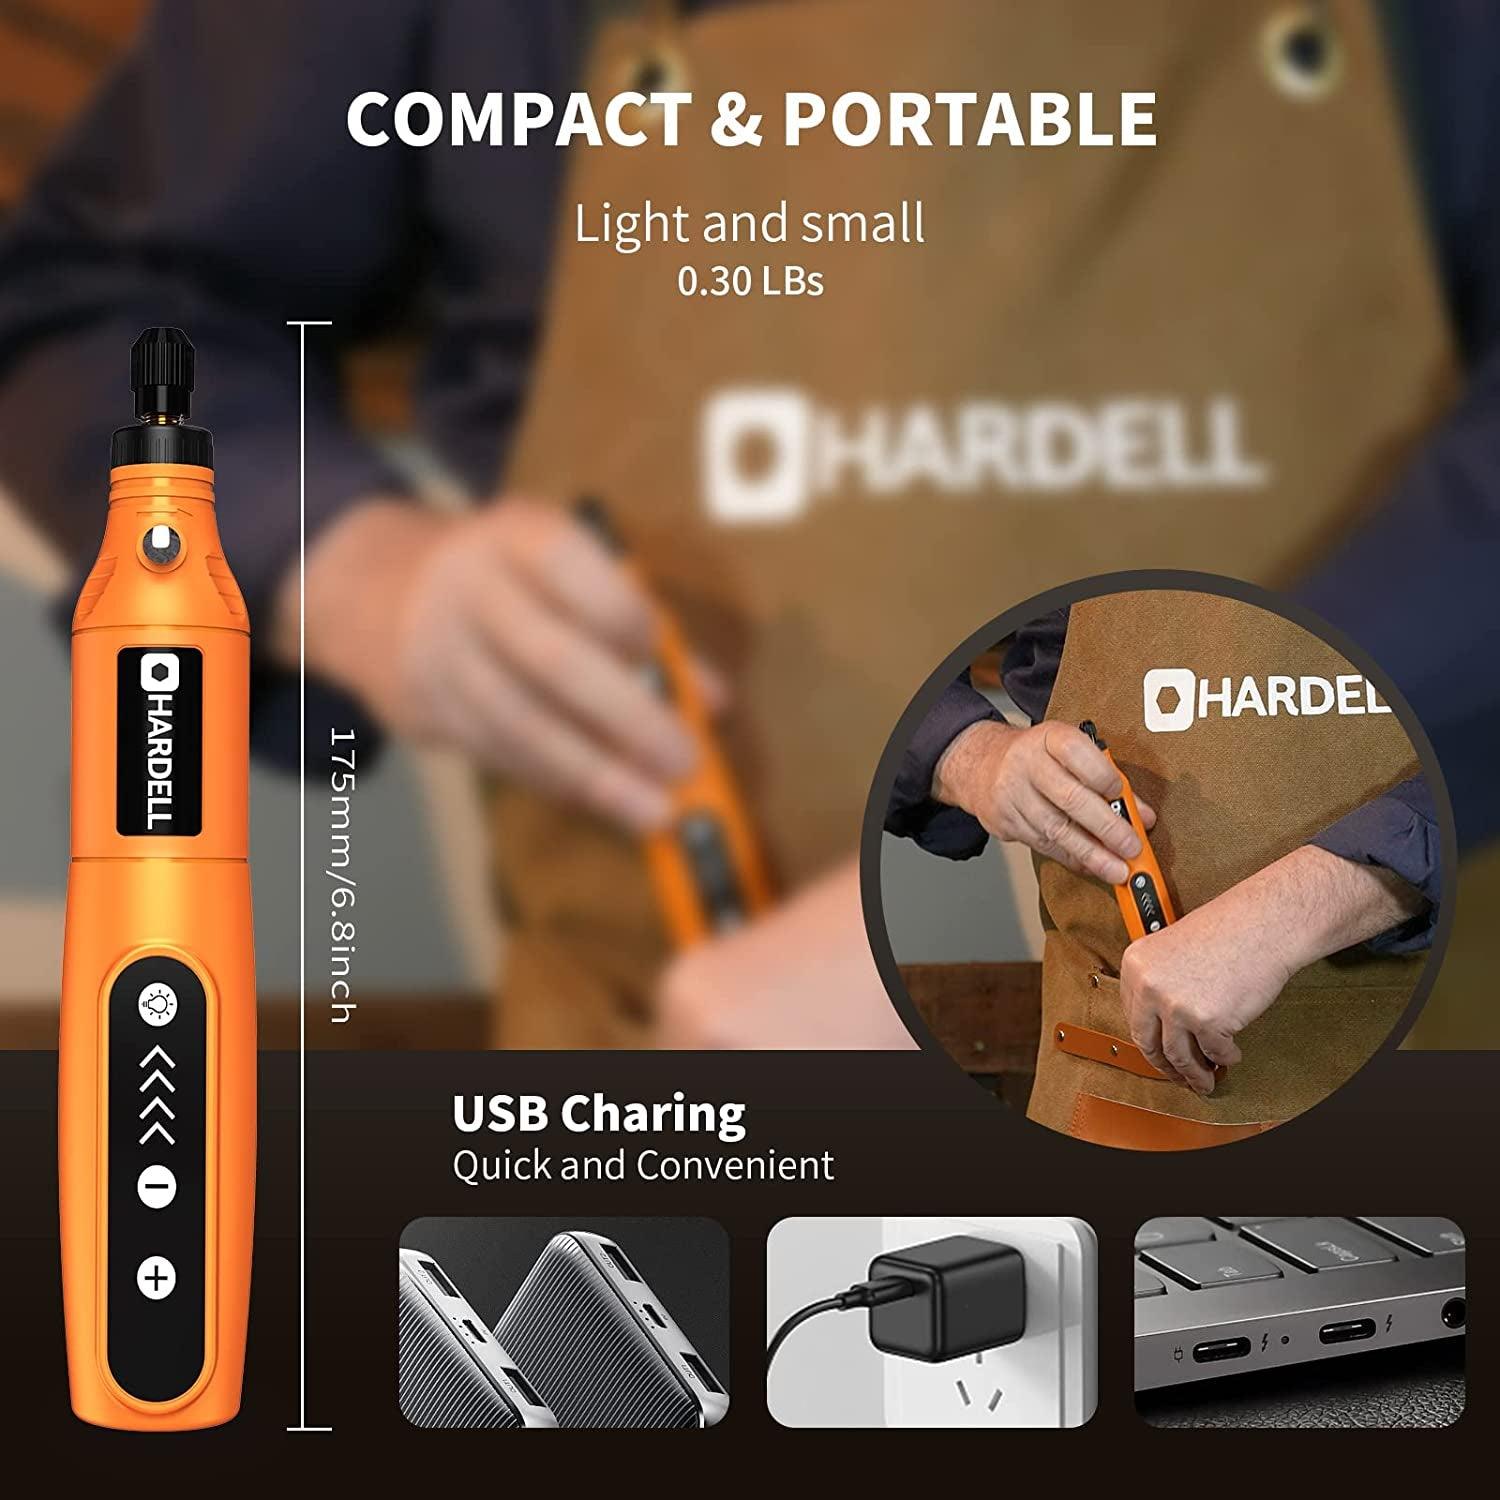 HARDELL Mini Cordless Rotary Tool Kit, 5-Speed and USB Charging with 61  Accessories, Multi-Purpose 3.7V Power Rotary Tool for Sanding, Polishing